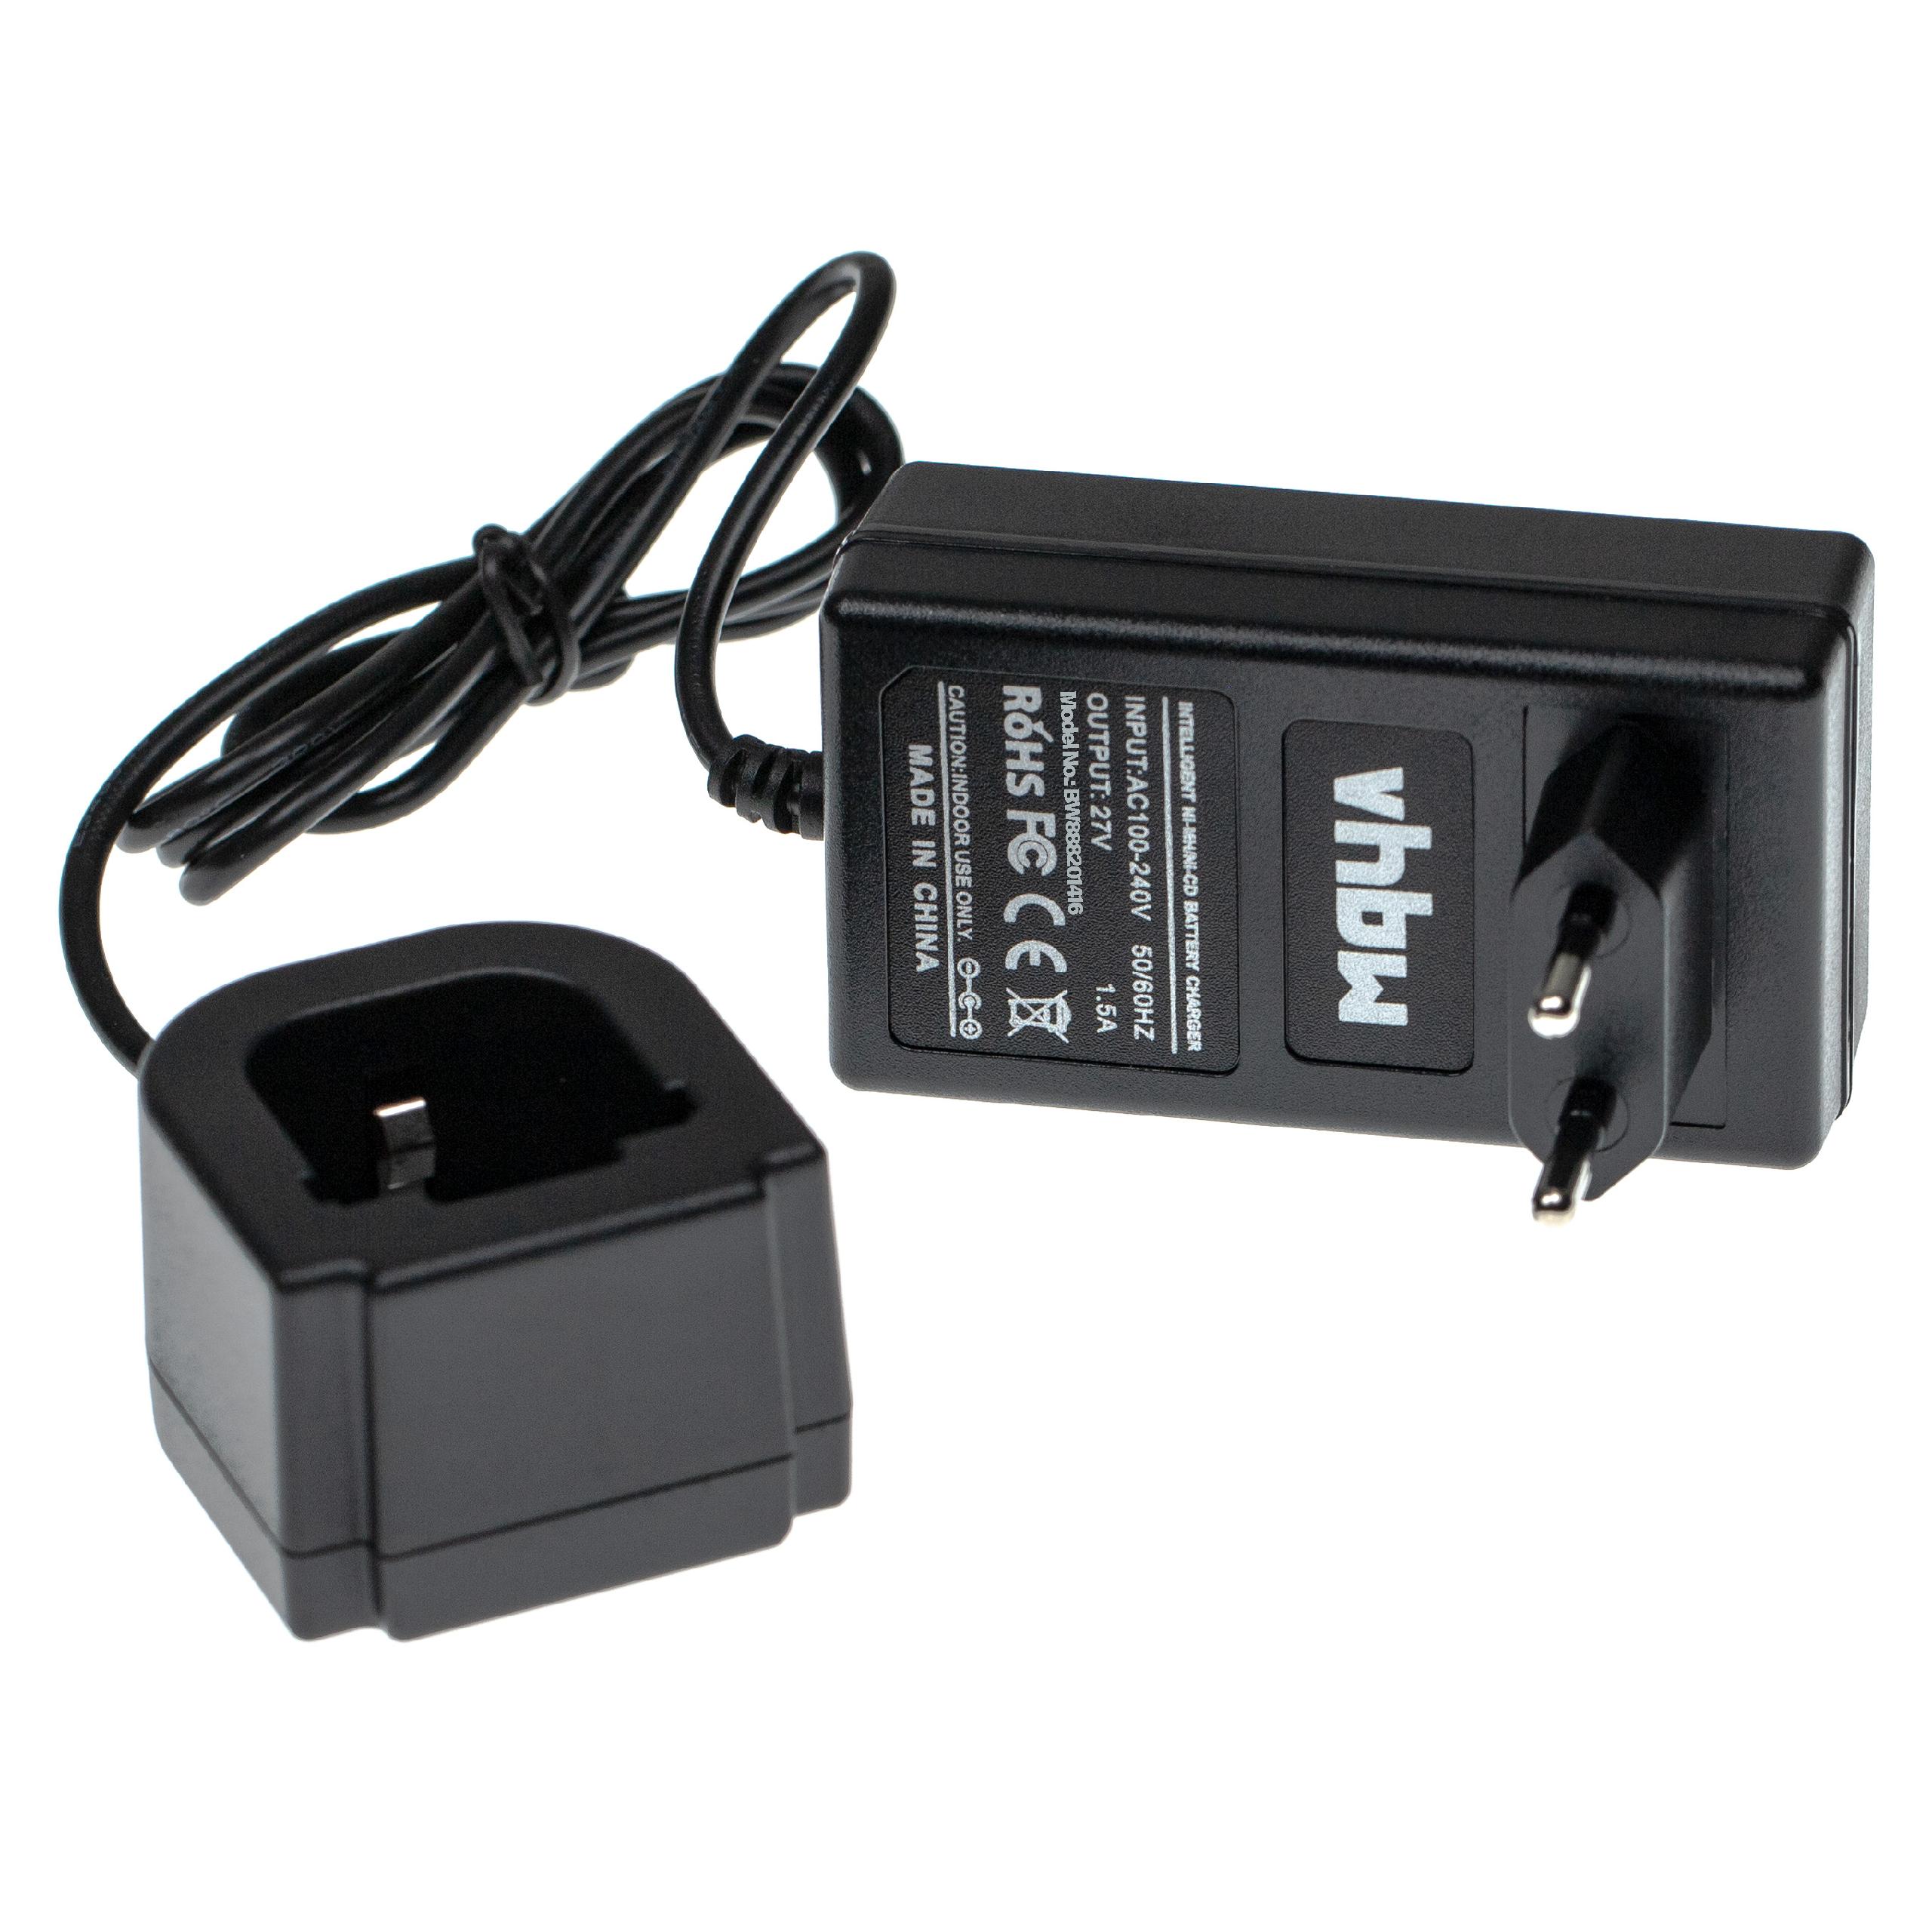 Charger suitable for 265605 , Hilti 265605 Power Tool Batteries etc. Ni-Cd / NiMH 27V